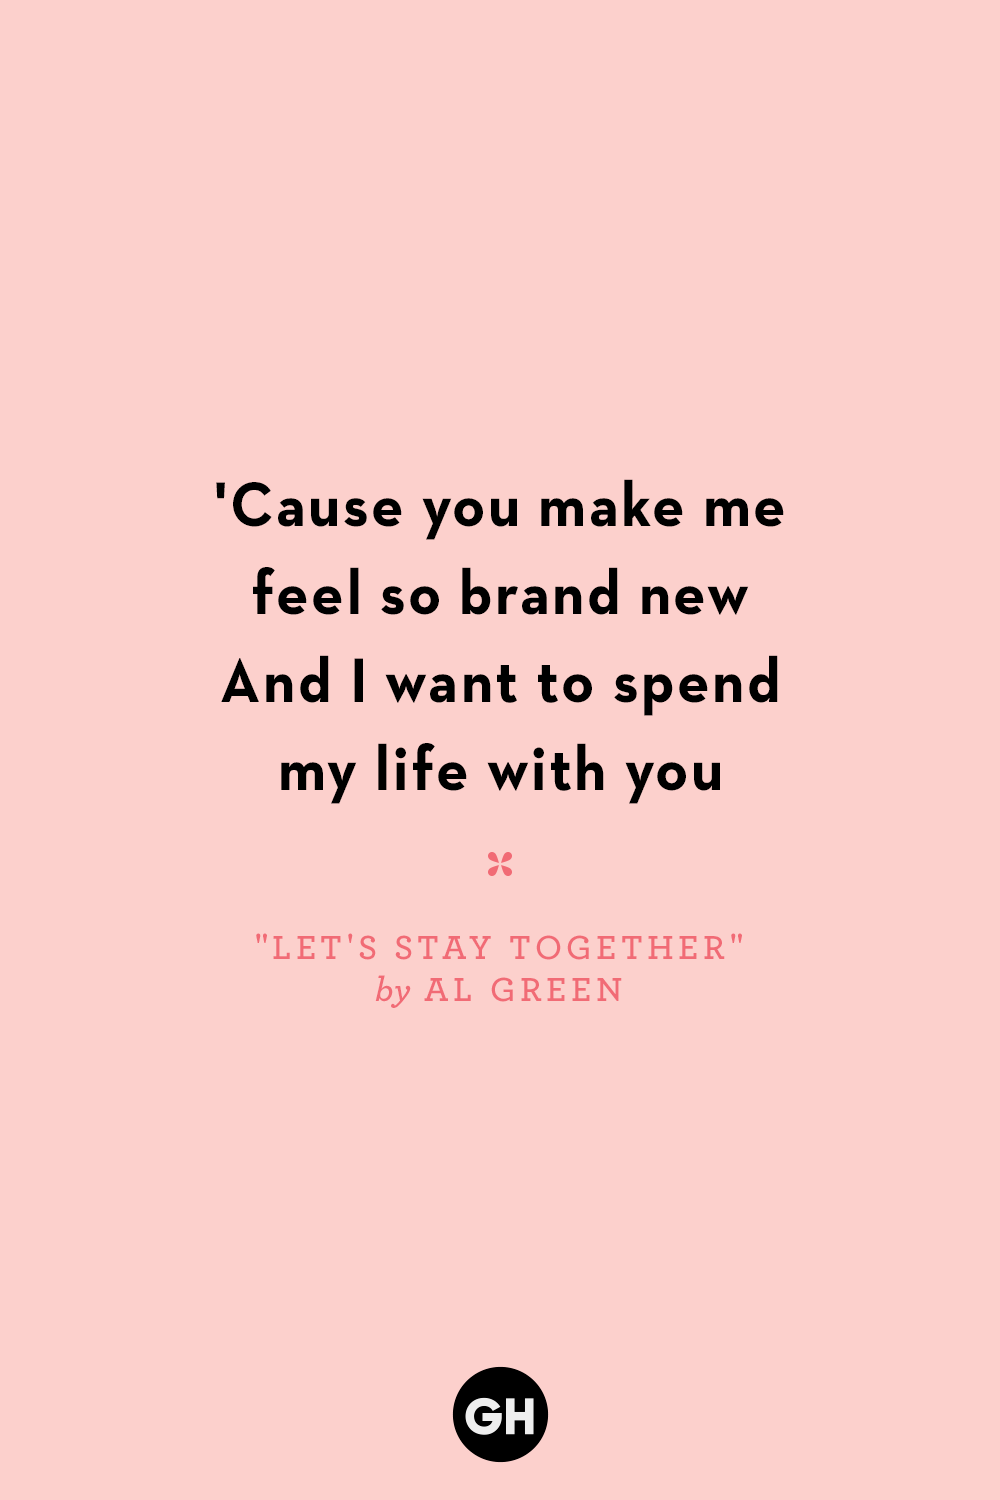 lyrics quotes from songs